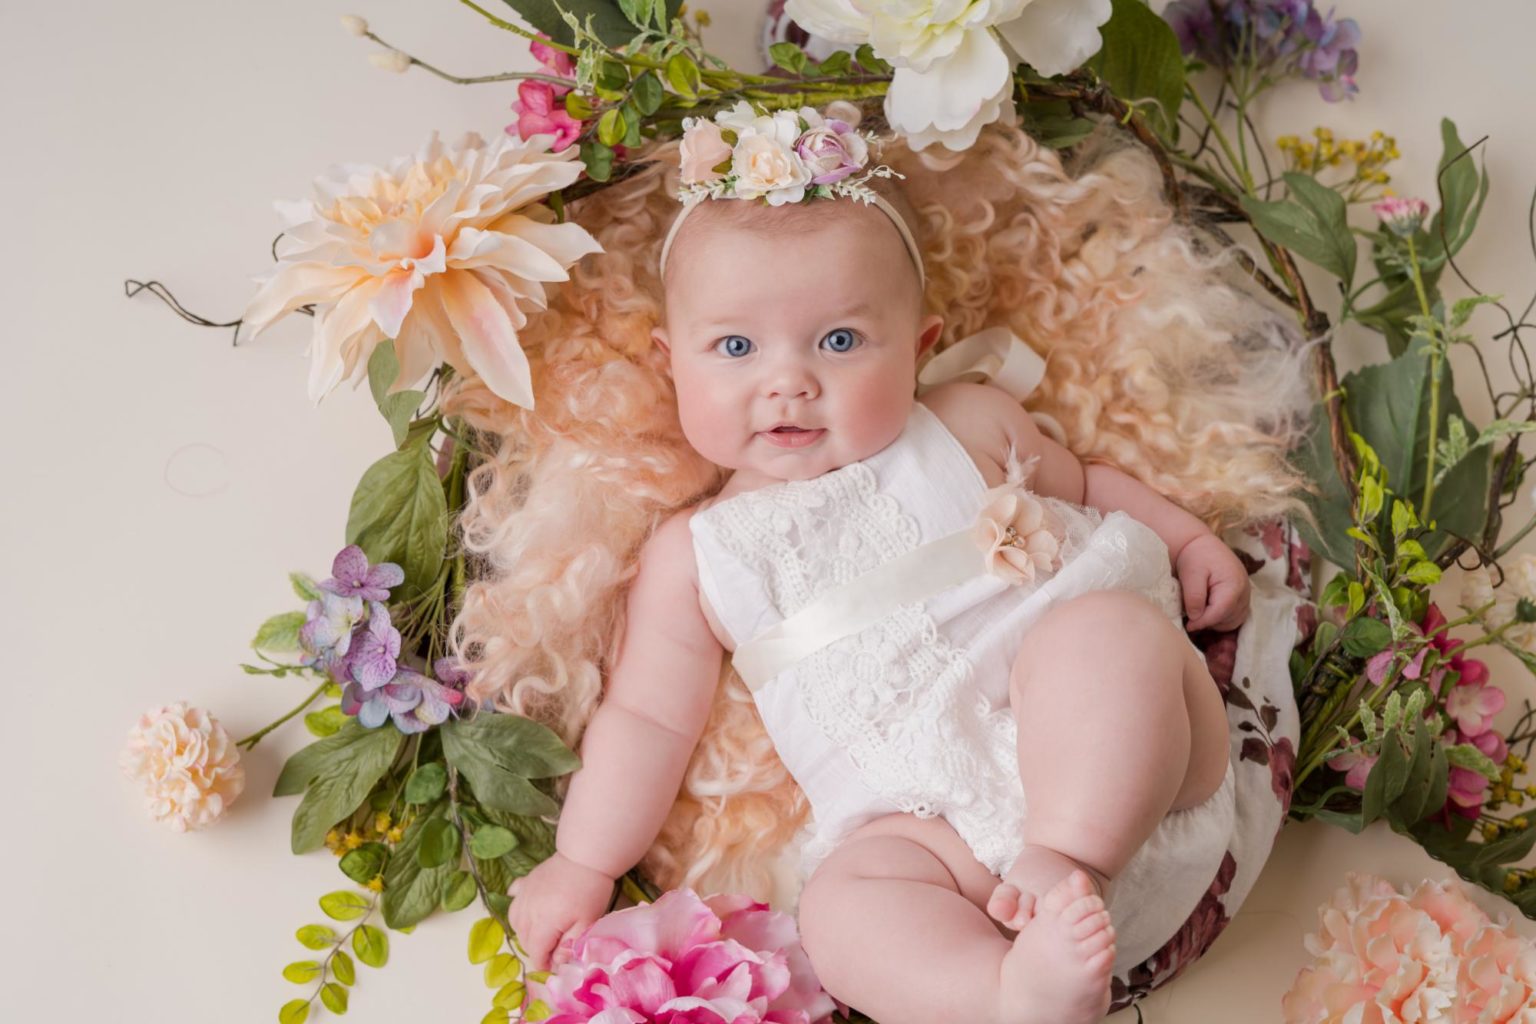 Milestone Session Outfits | Katie Corinne Photography's Blog